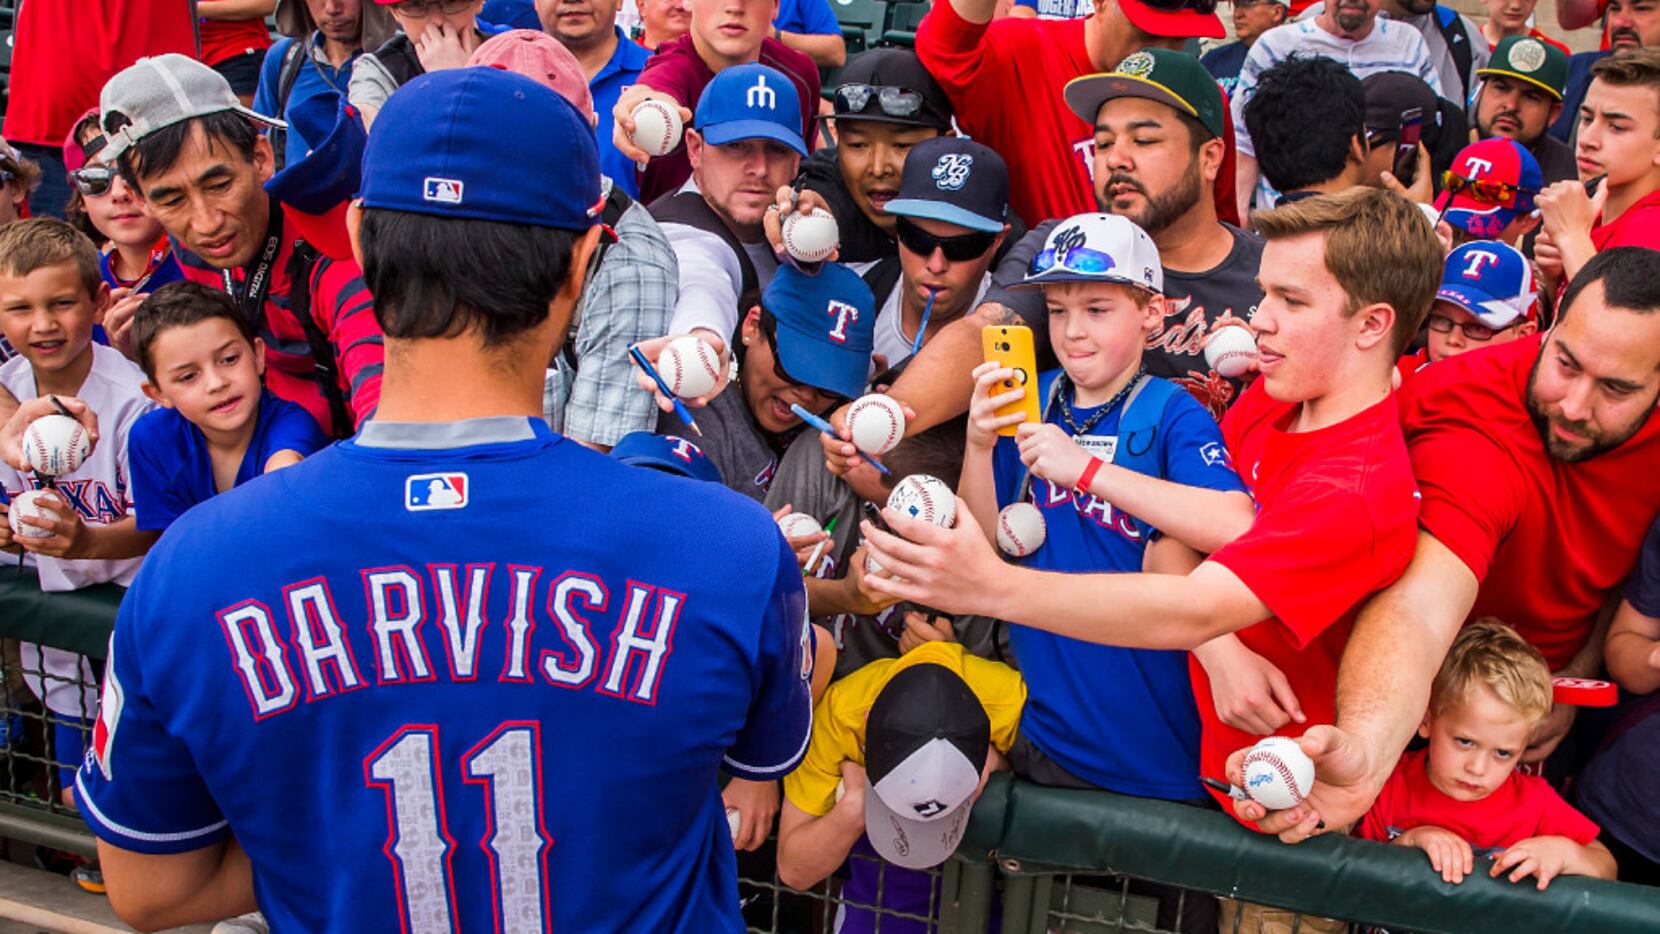 Check out the bobbleheads and other goodies the Rangers are giving